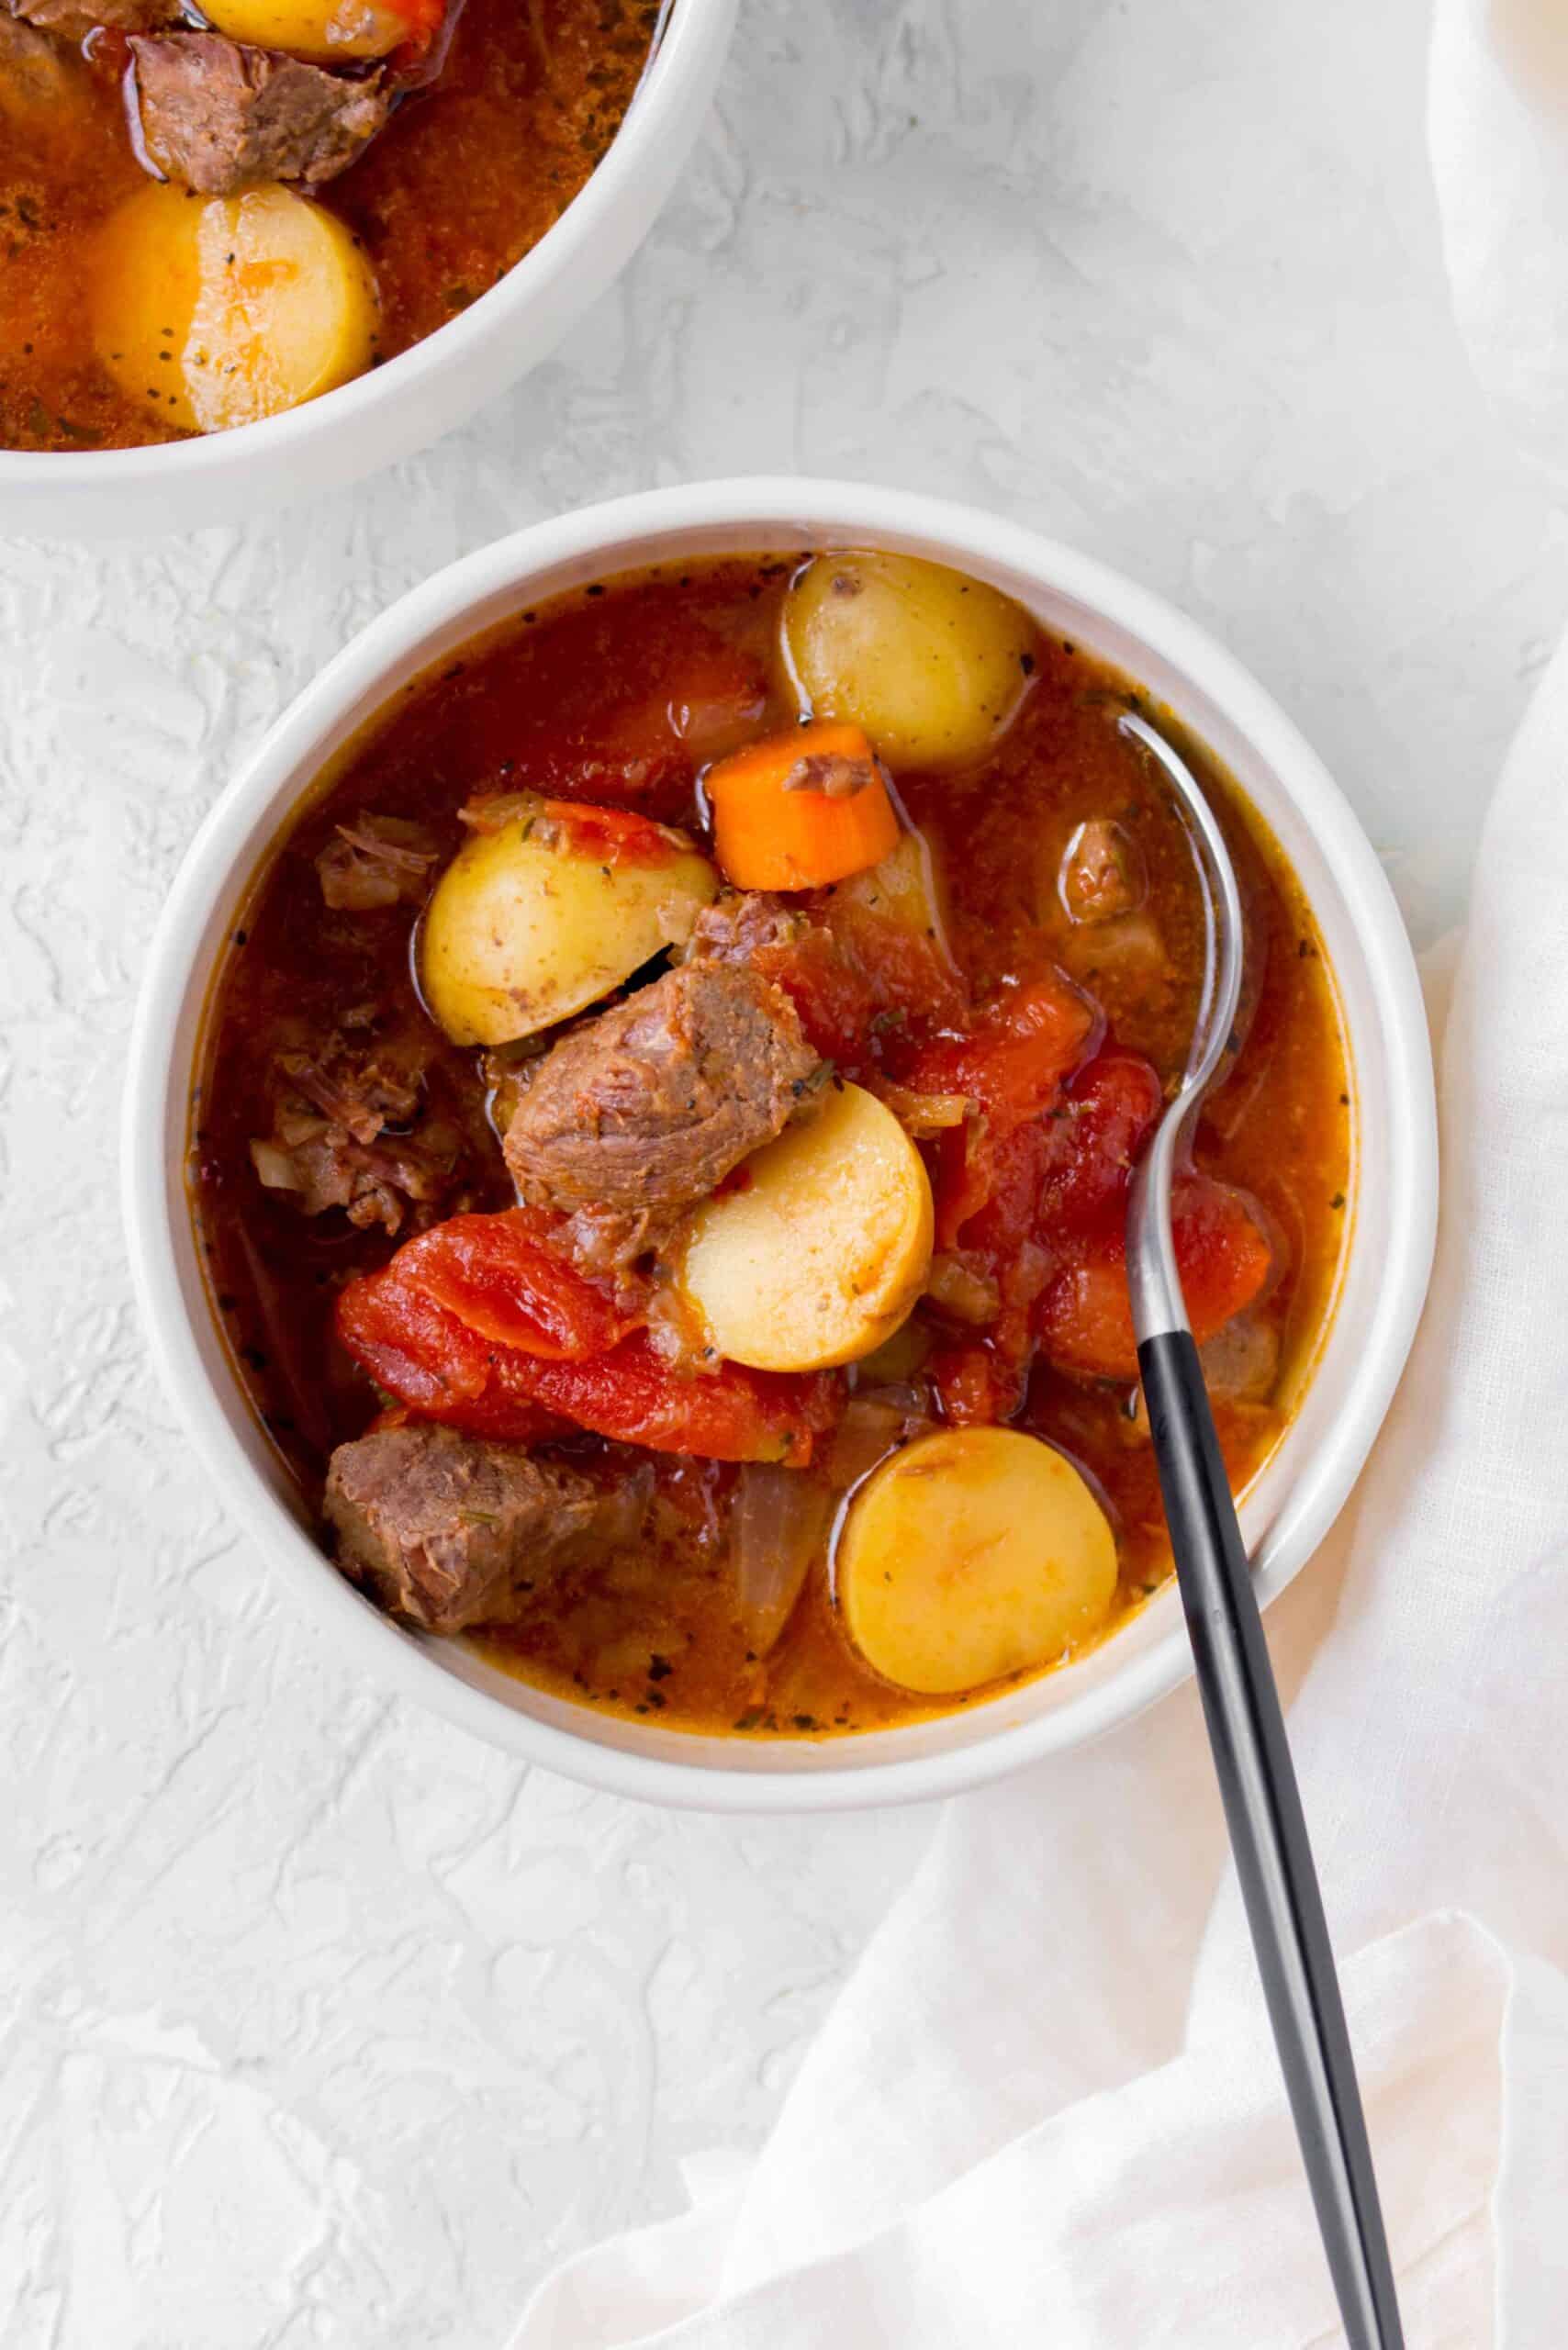 This classic hearty Beef and Tomato Soup warms you up inside out. A childhood favourite, this beef and tomato stew can be made with the Instant Pot or on the stove top!